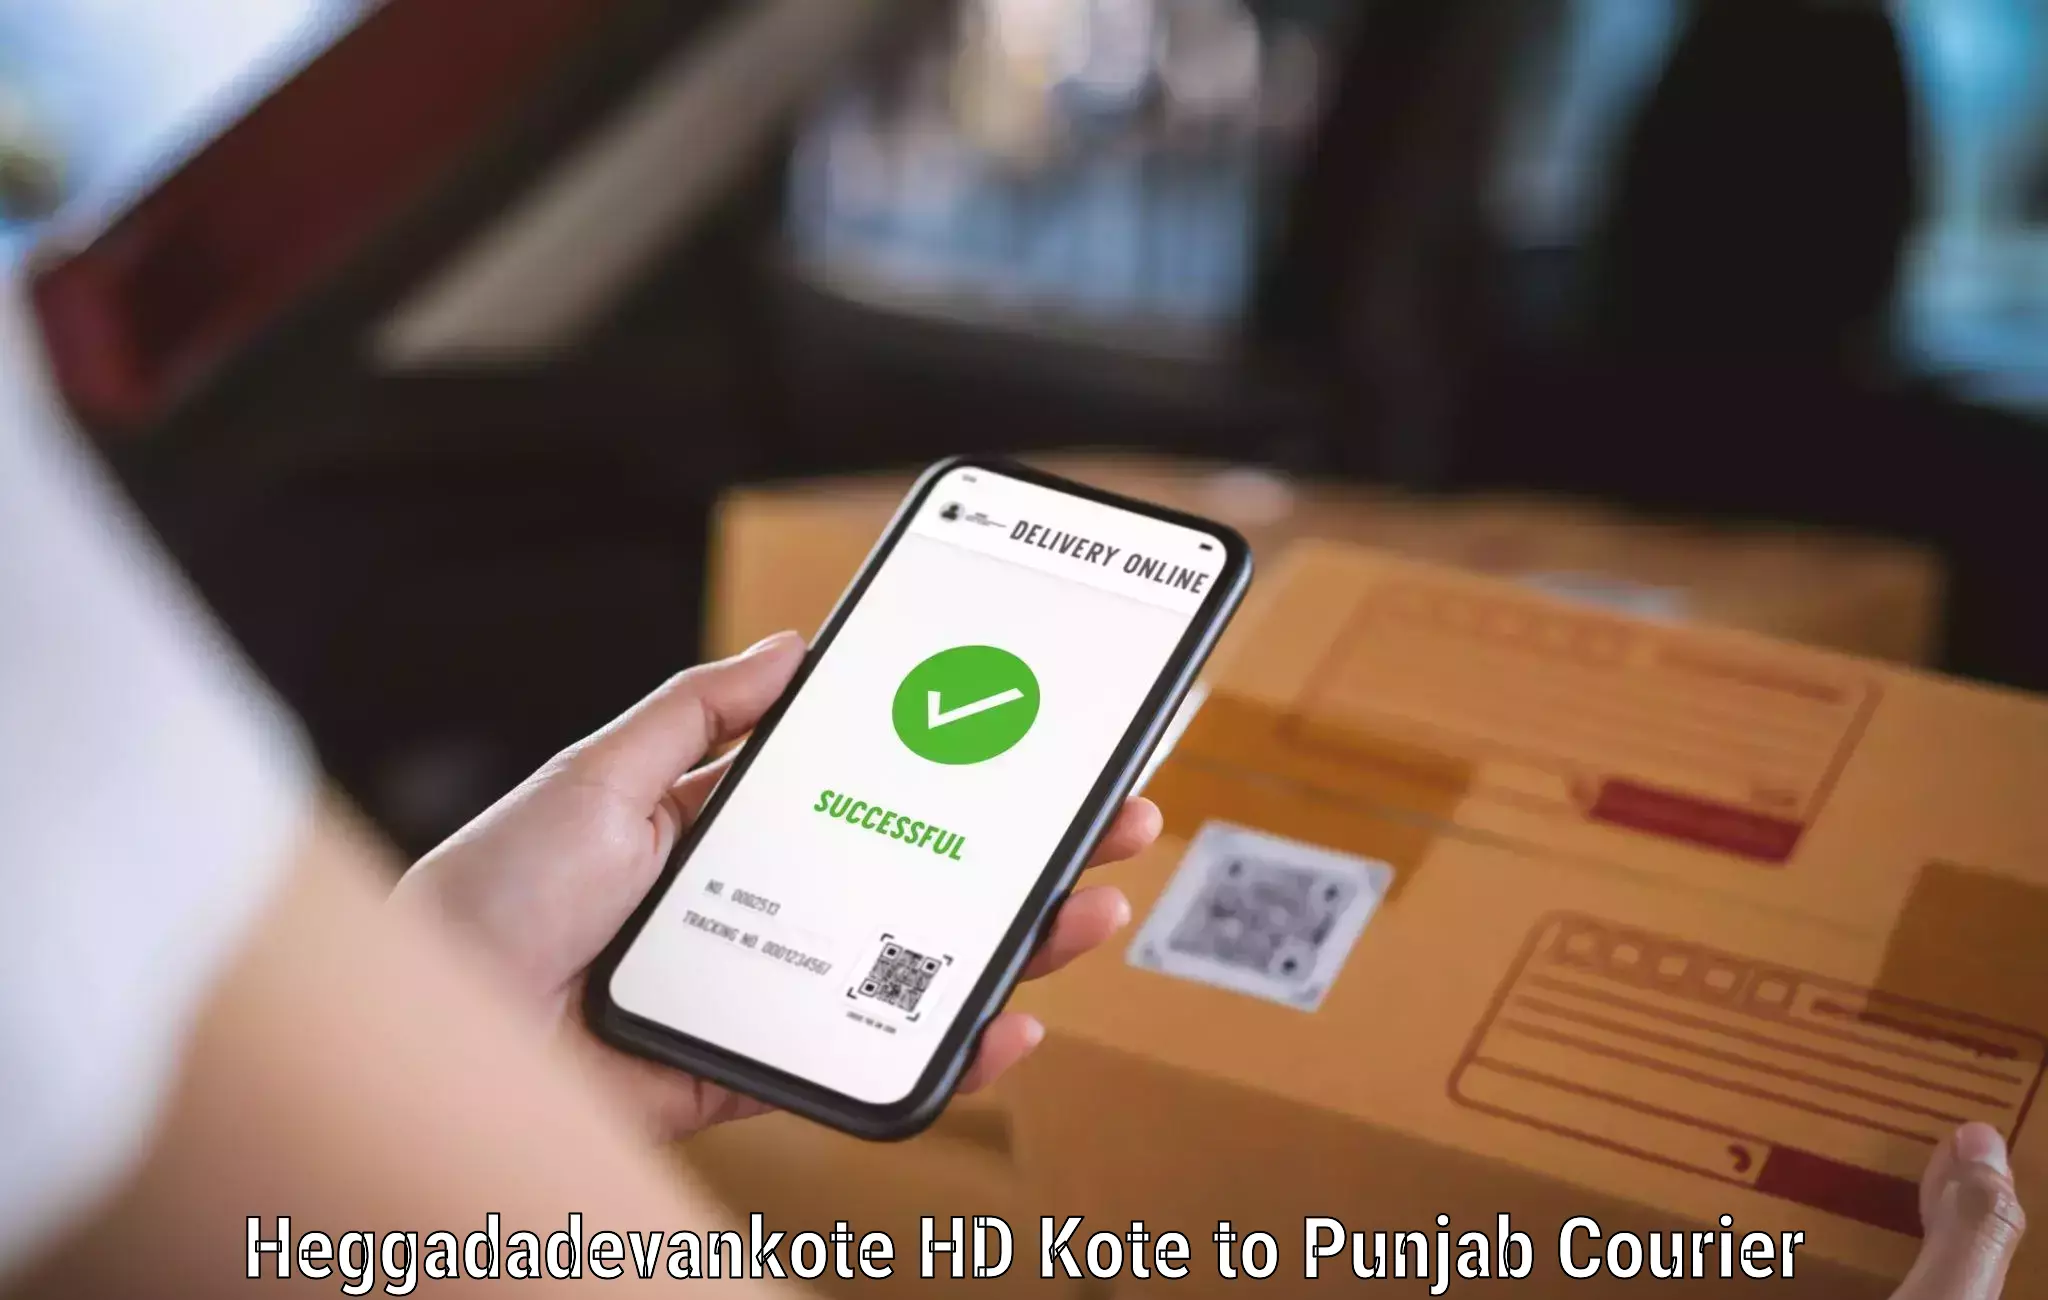 Nationwide parcel services Heggadadevankote HD Kote to Punjab Agricultural University Ludhiana